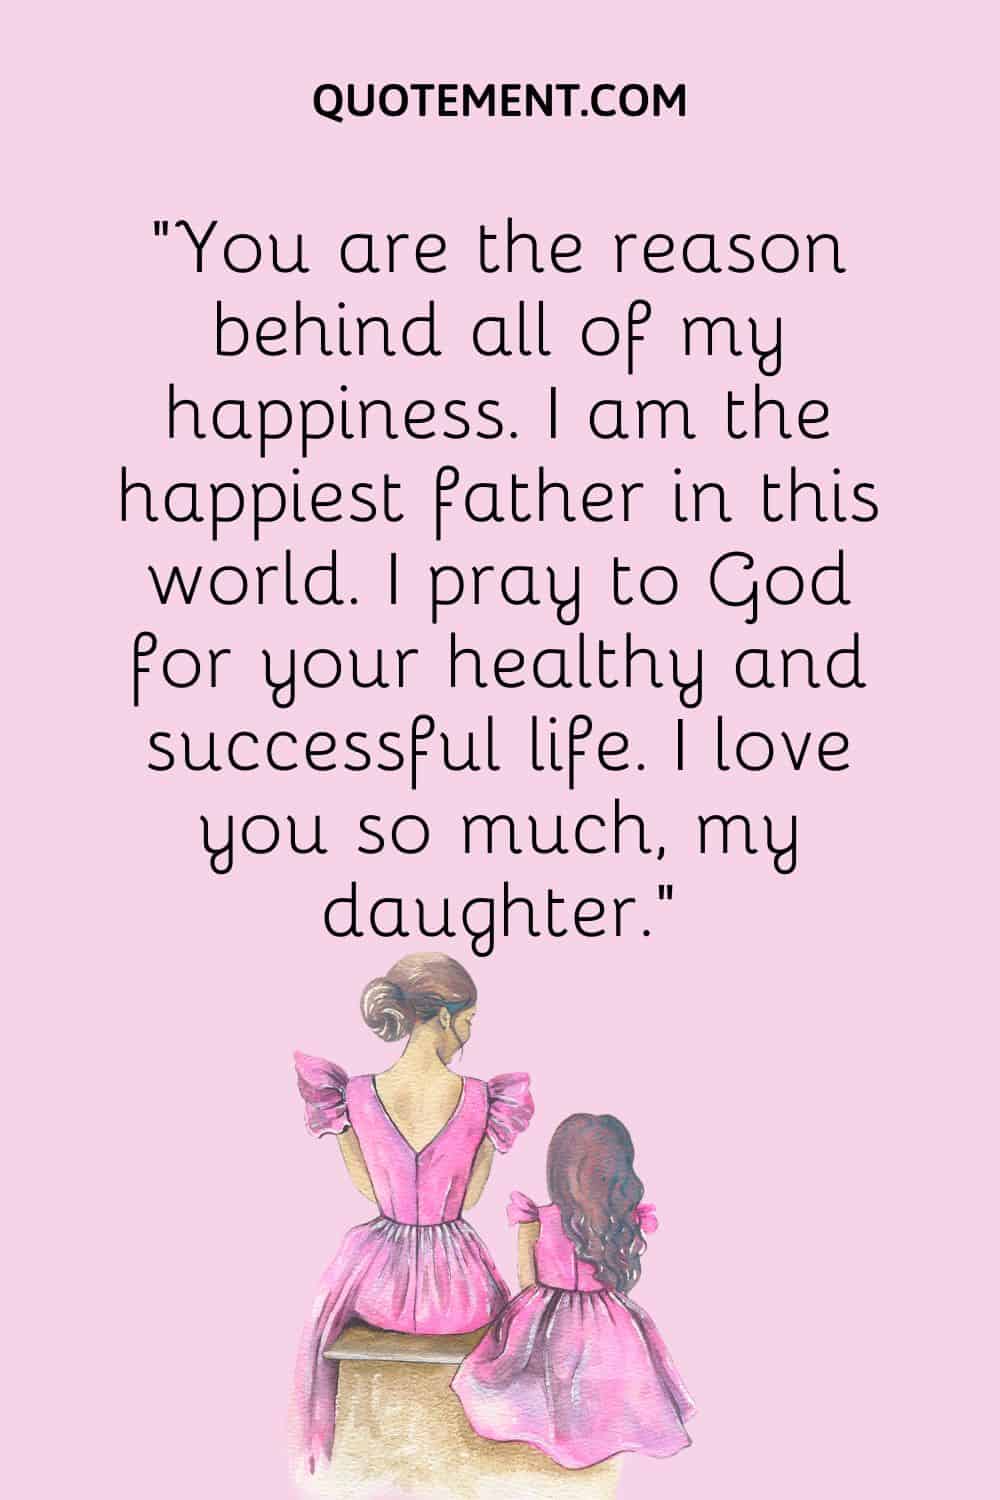 “You are the reason behind all of my happiness. I am the happiest father in this world. I pray to God for your healthy and successful life. I love you so much, my daughter.”